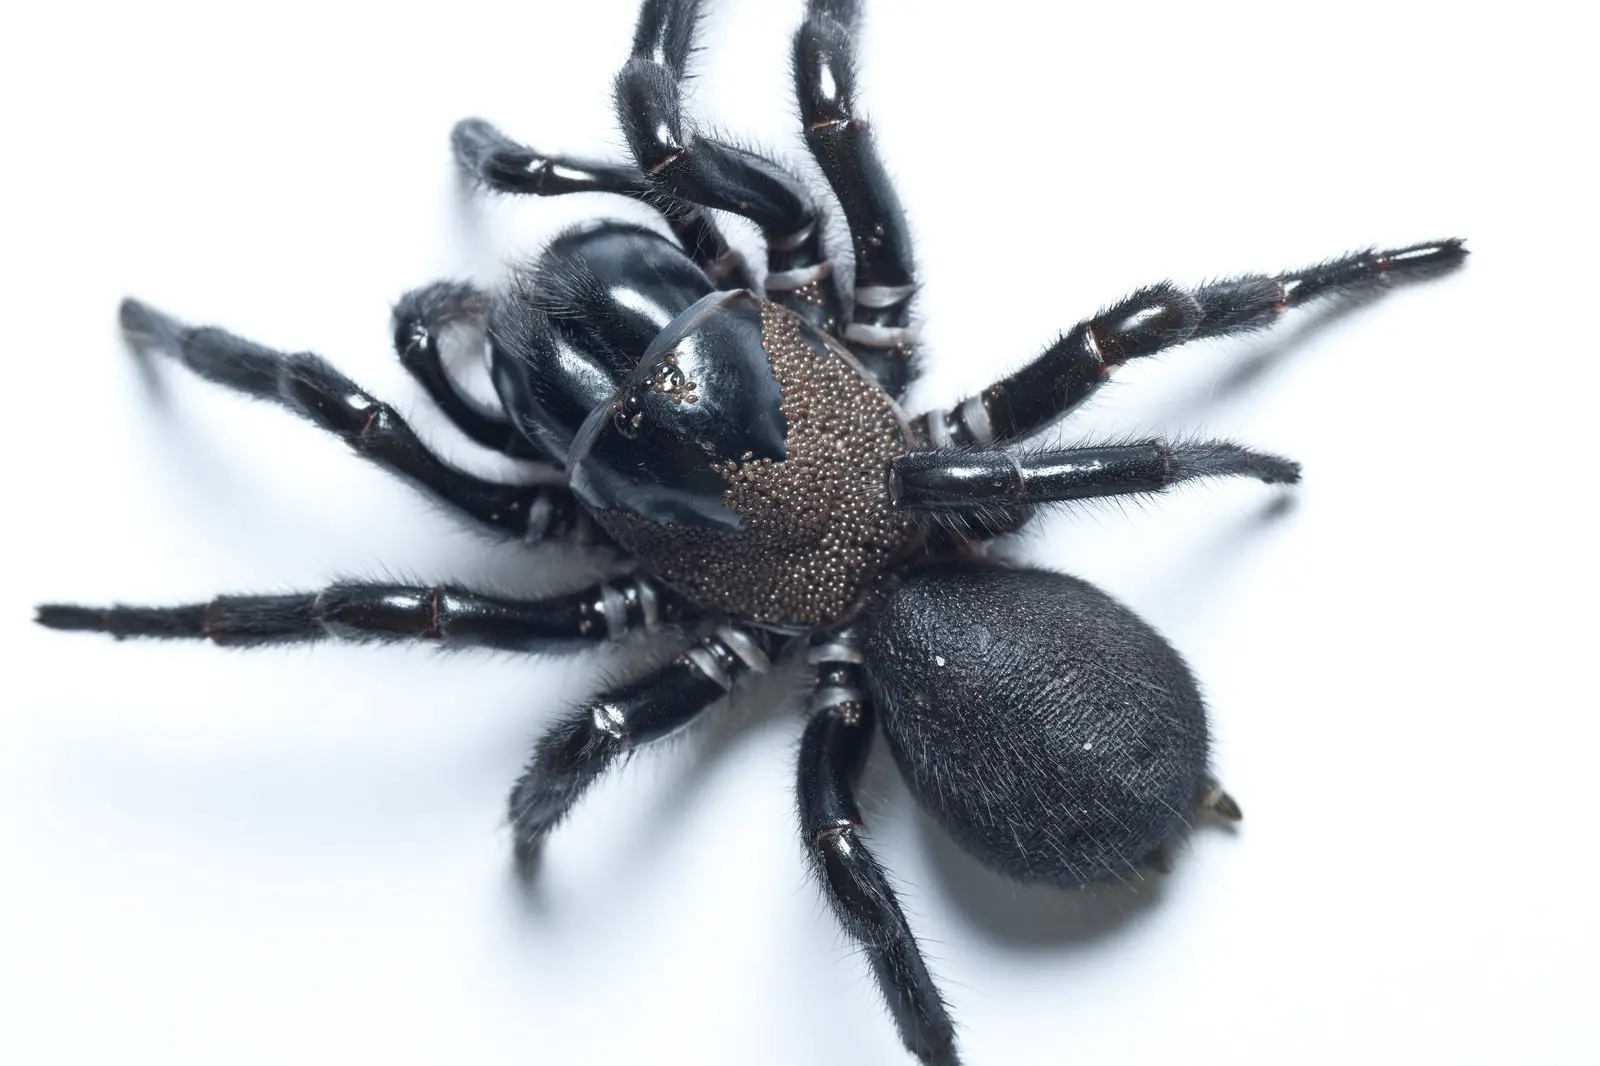 Identifying Funnel Web Spiders